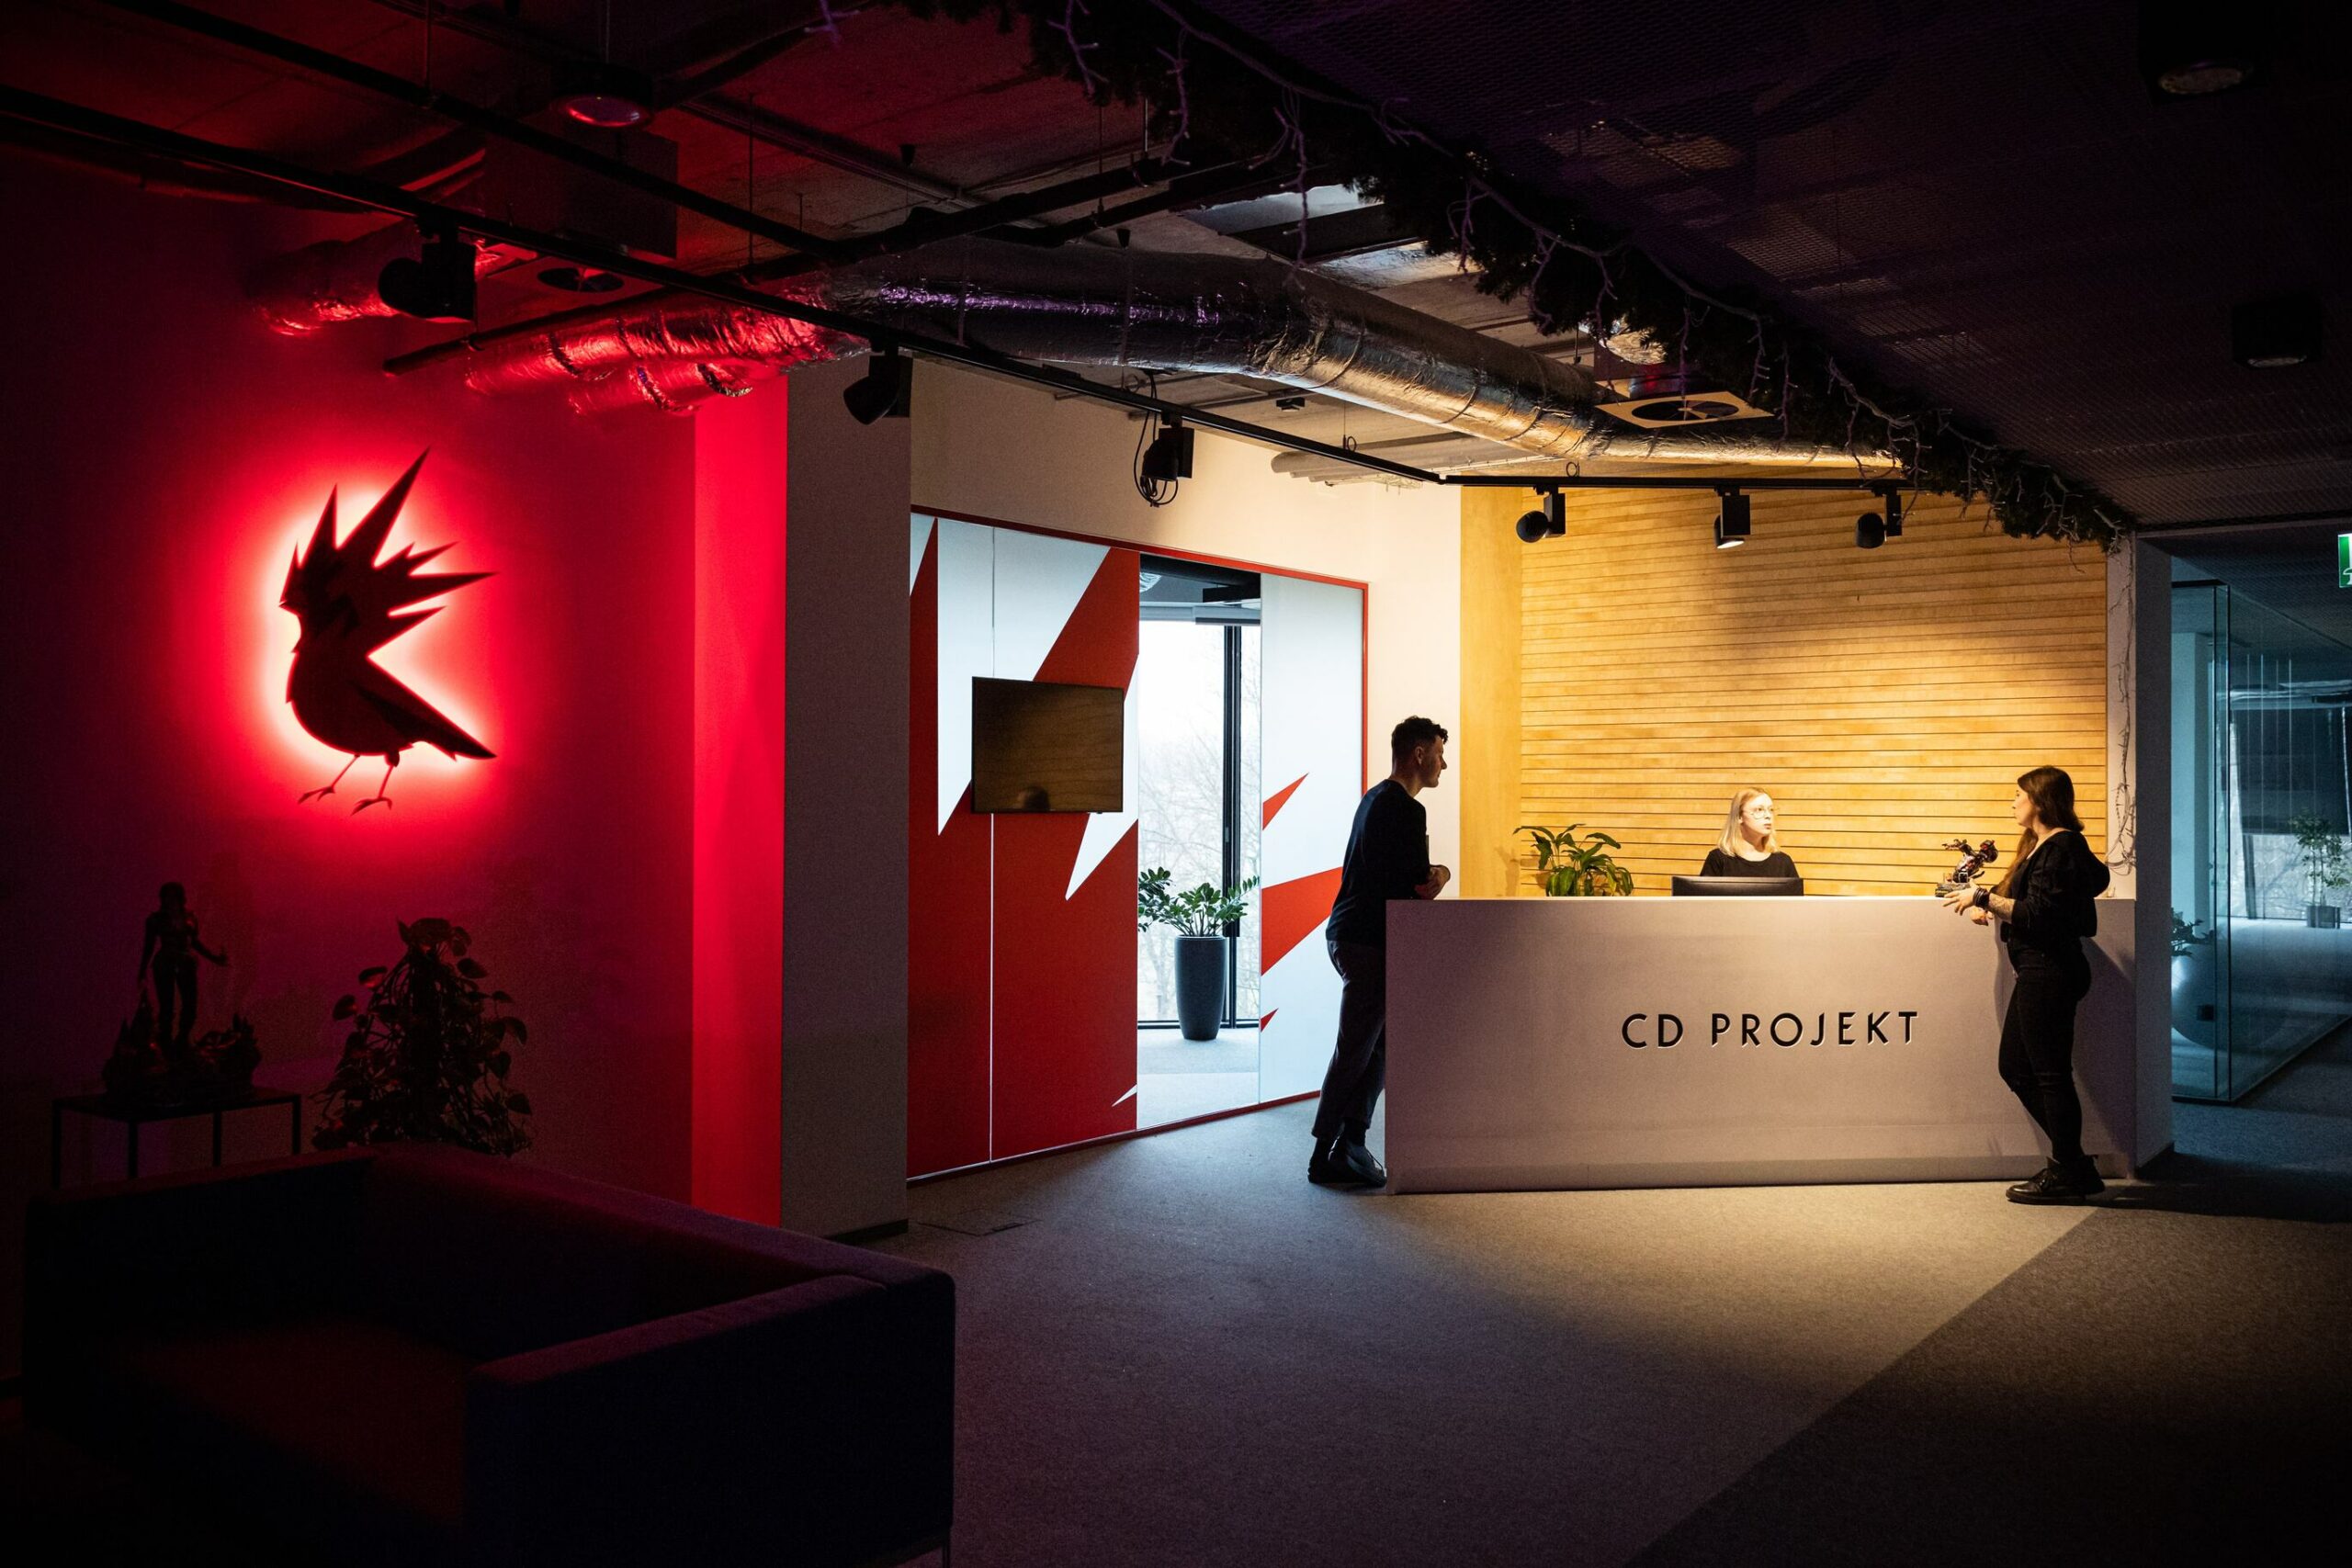 CD Projekt Red Developers Join Forces With Other Polish Video Game Devs To Unionize